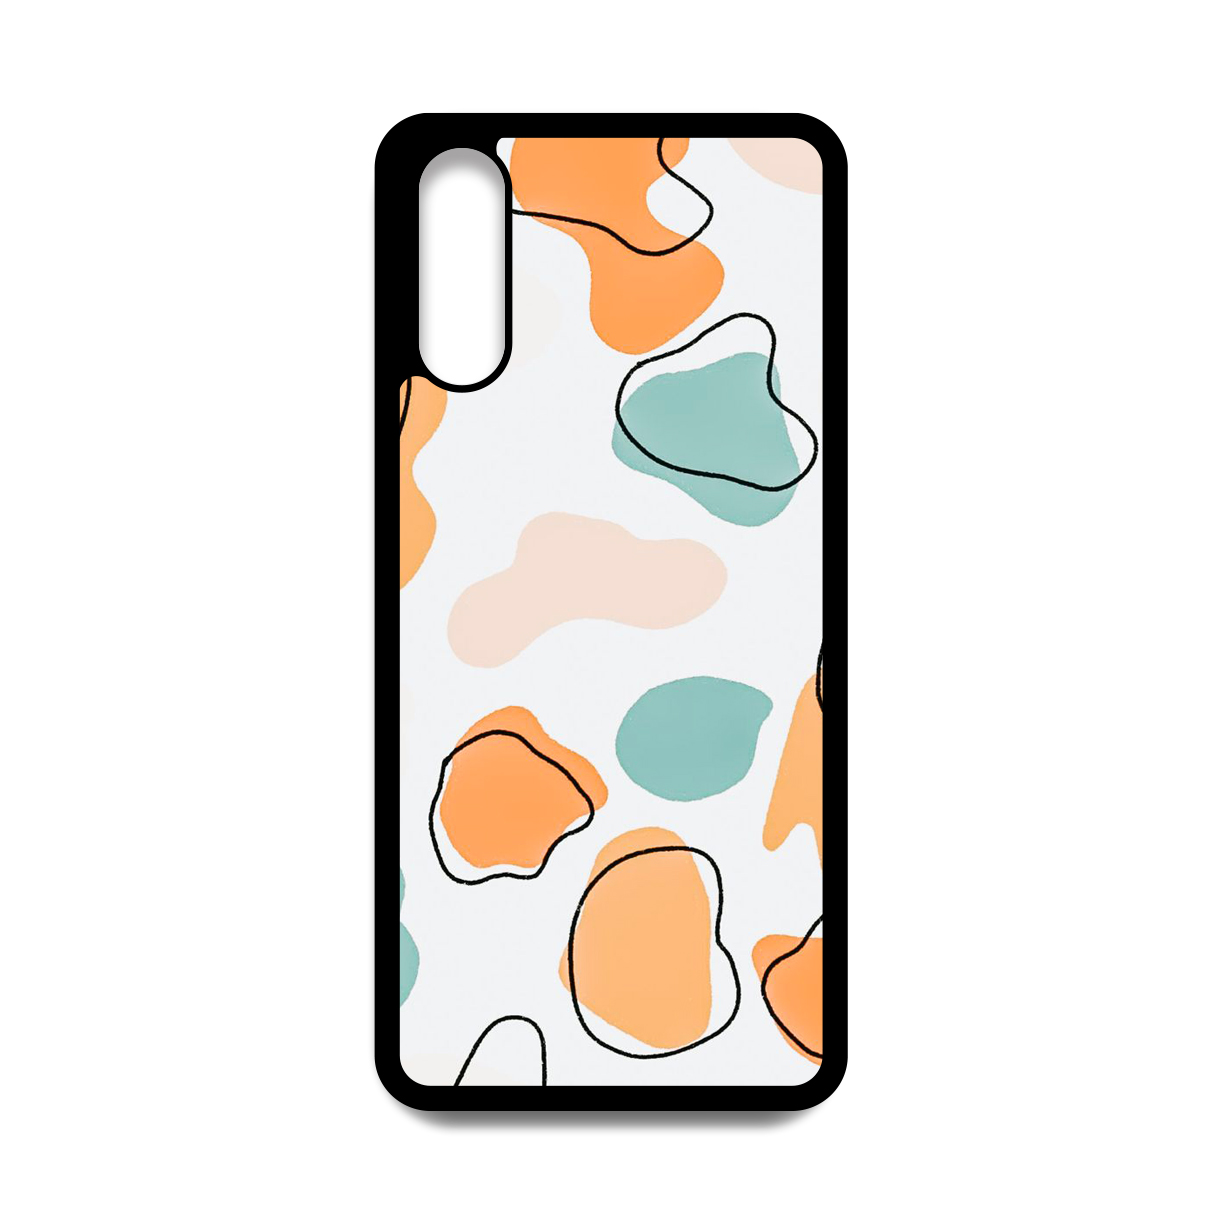 Caitscases TPU Fashion Covers - Samsung Galaxy A30s (Pastel Smiley)